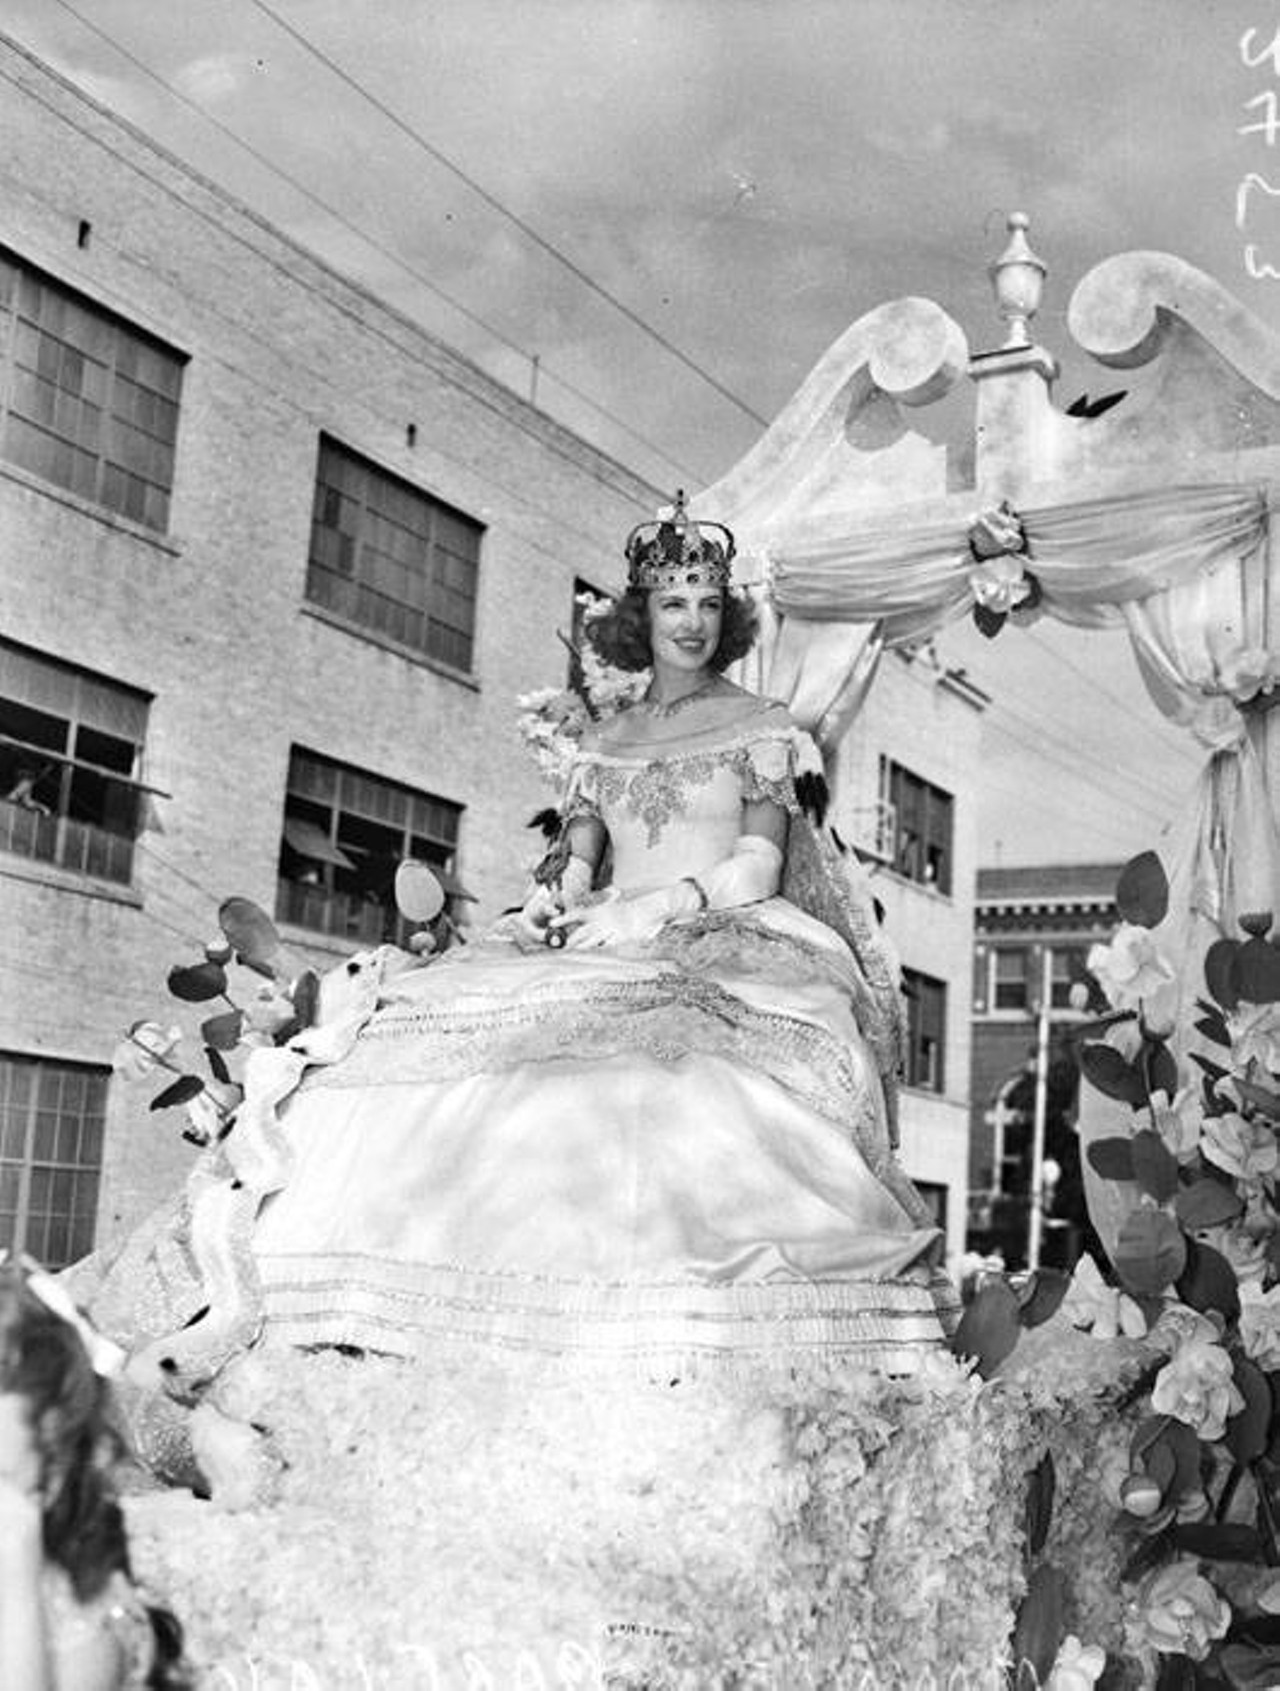 Margaret ''Monnie'' Barclay, Fiesta Queen
The Queen of the Court of the Old South rides upon her float in 1940.